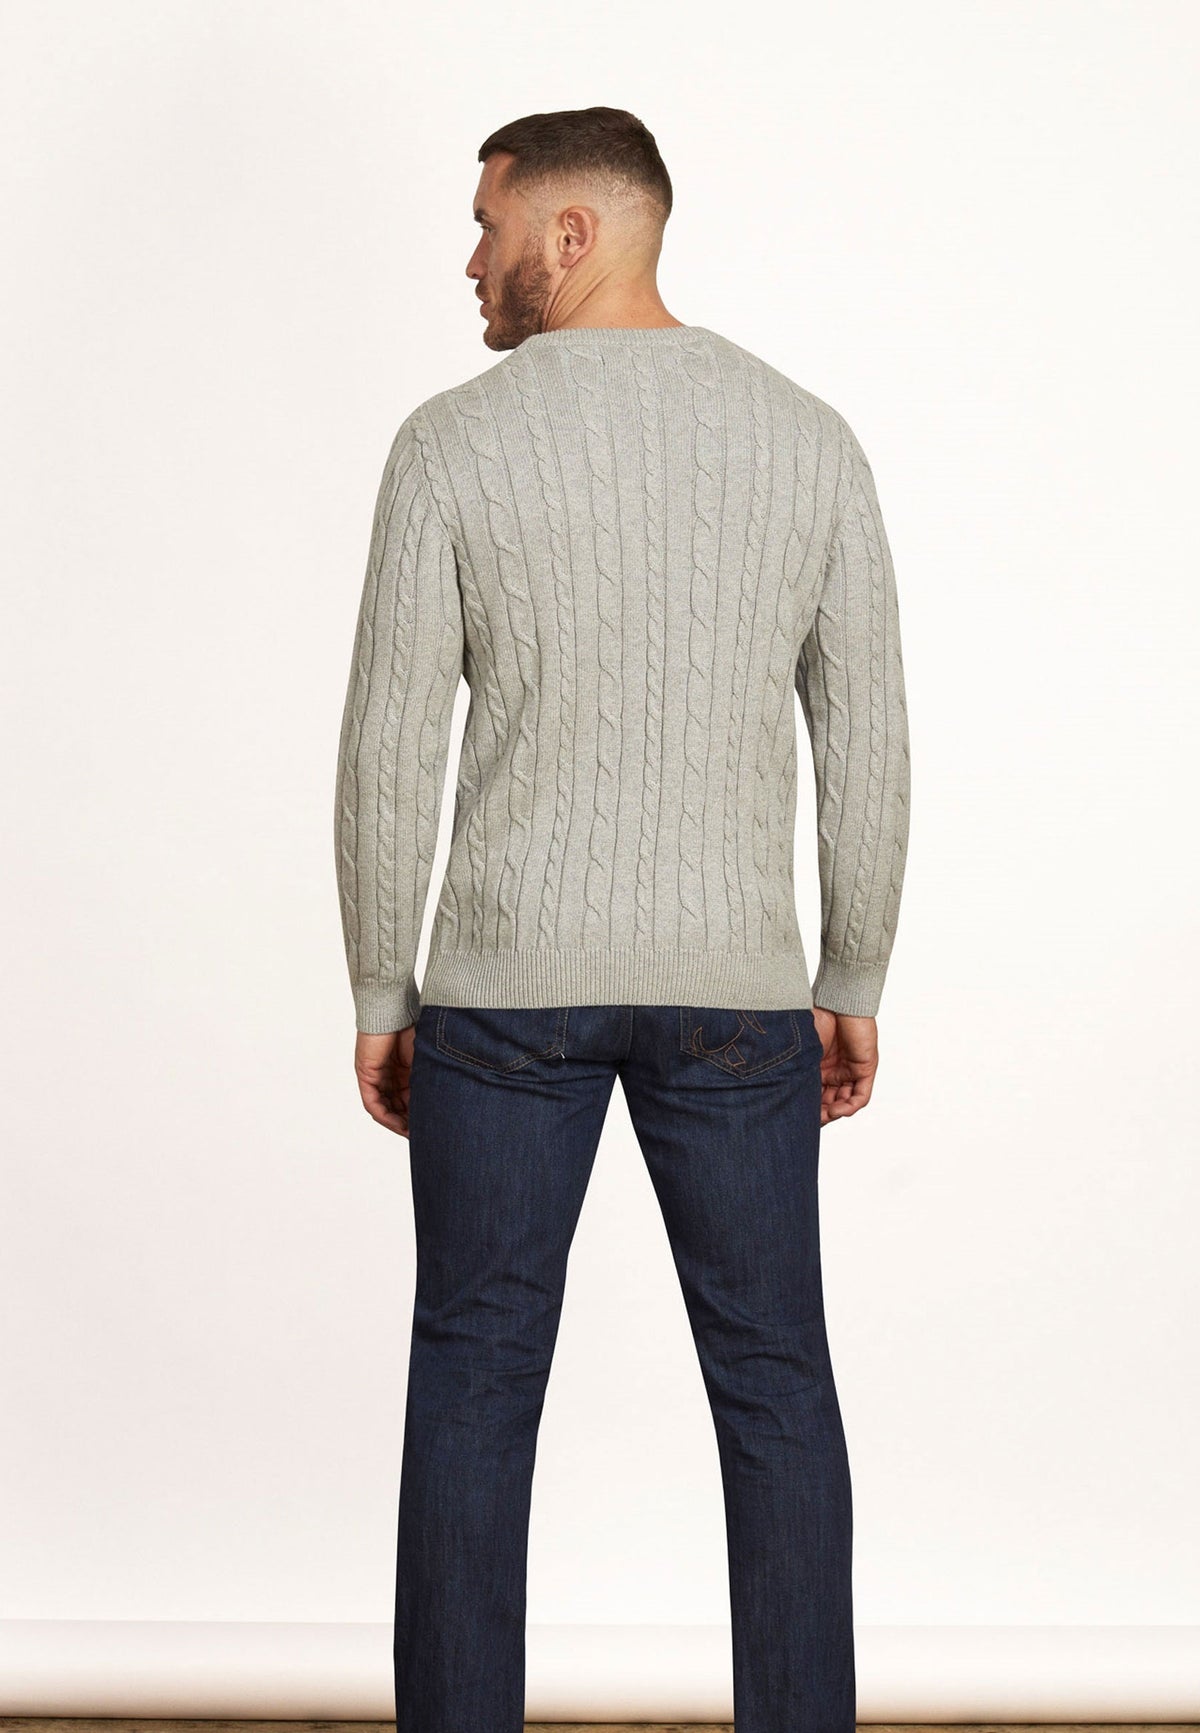 Classic Cable Knit Crew - Grey Marl